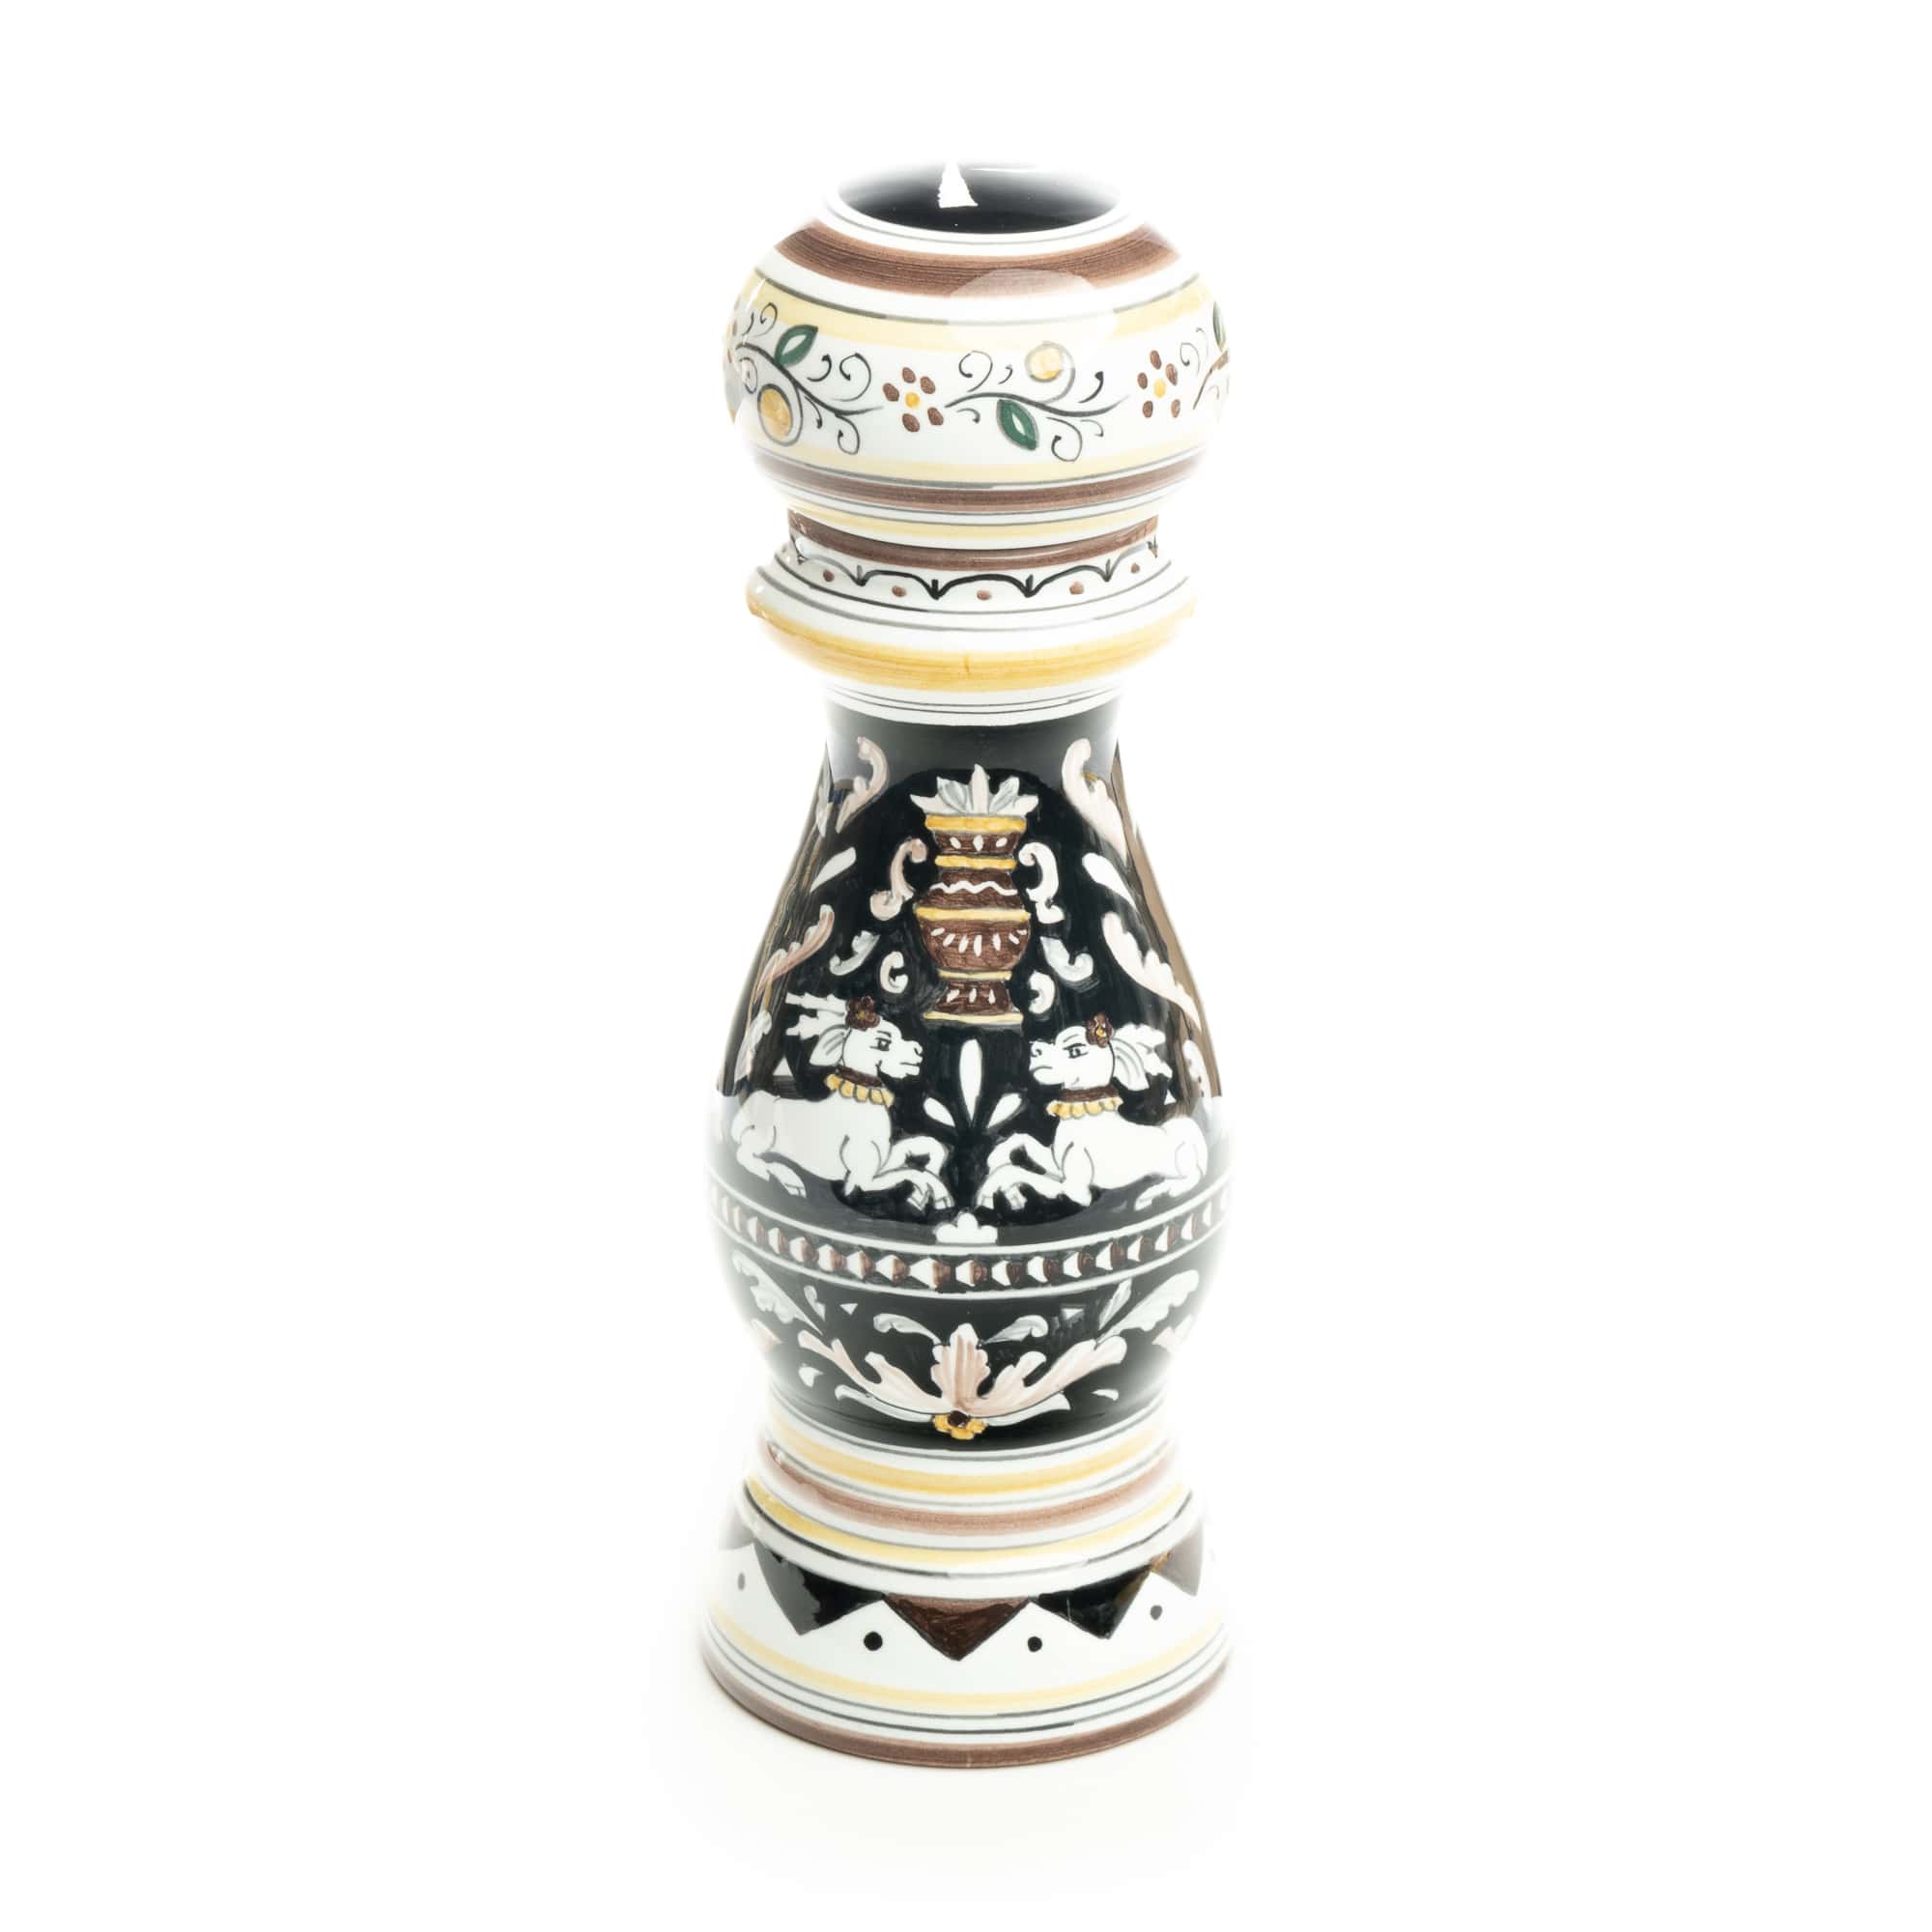 Siena - Salt & Pepper Grinder Set, ceramics, pottery, italian design, majolica, handmade, handcrafted, handpainted, home decor, kitchen art, home goods, deruta, majolica, Artisan, treasures, traditional art, modern art, gift ideas, style, SF, shop small business, artists, shop online, landmark store, legacy, one of a kind, limited edition, gift guide, gift shop, retail shop, decorations, shopping, italy, home staging, home decorating, home interiors